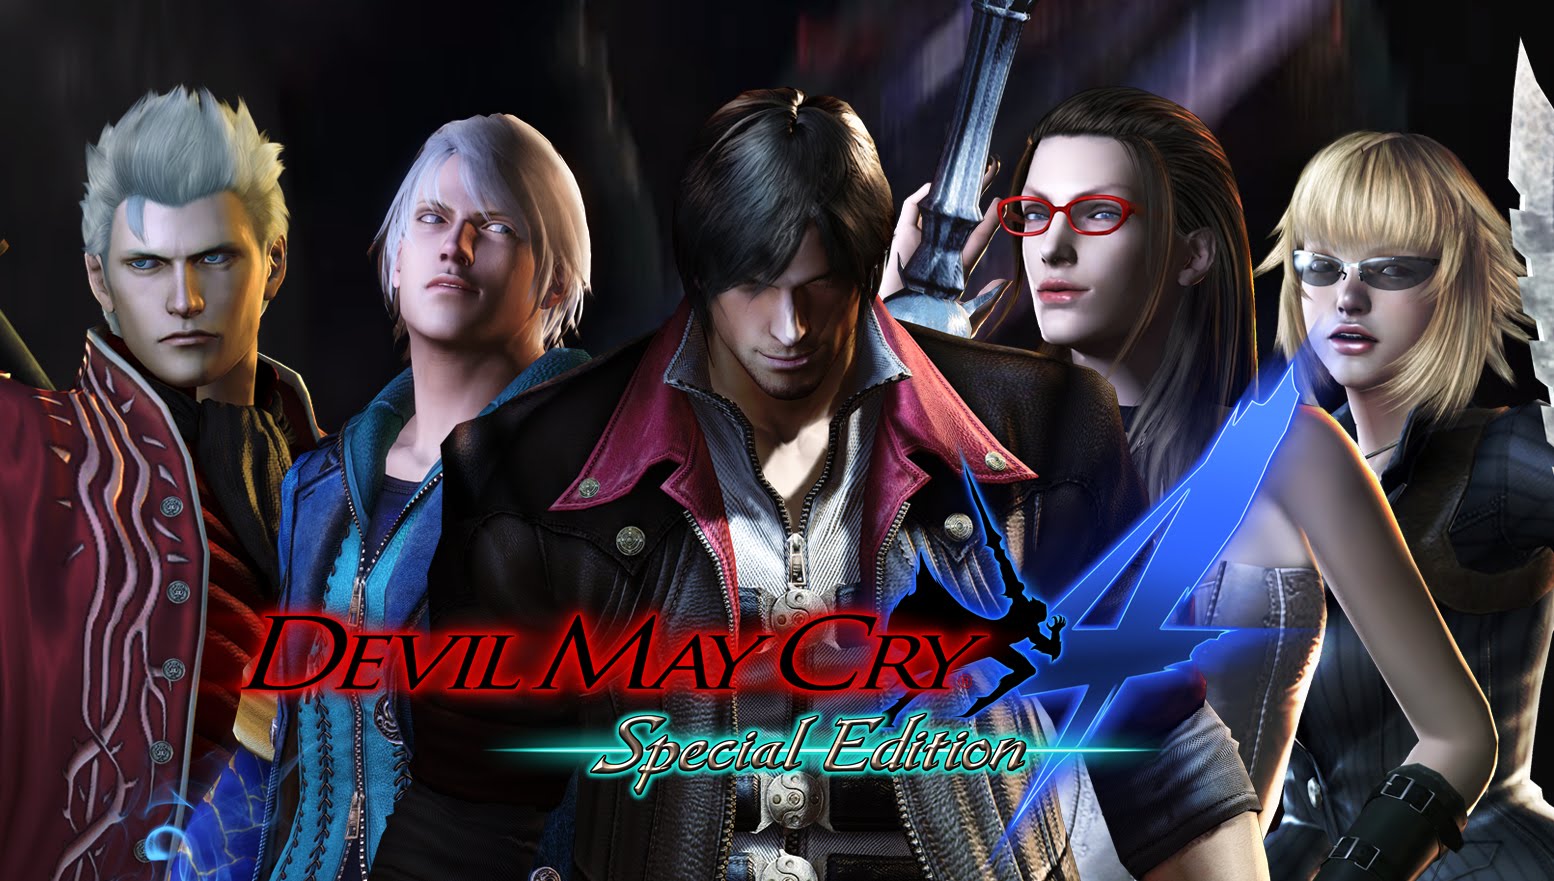 devil may cry 4 highly compressed 10mb